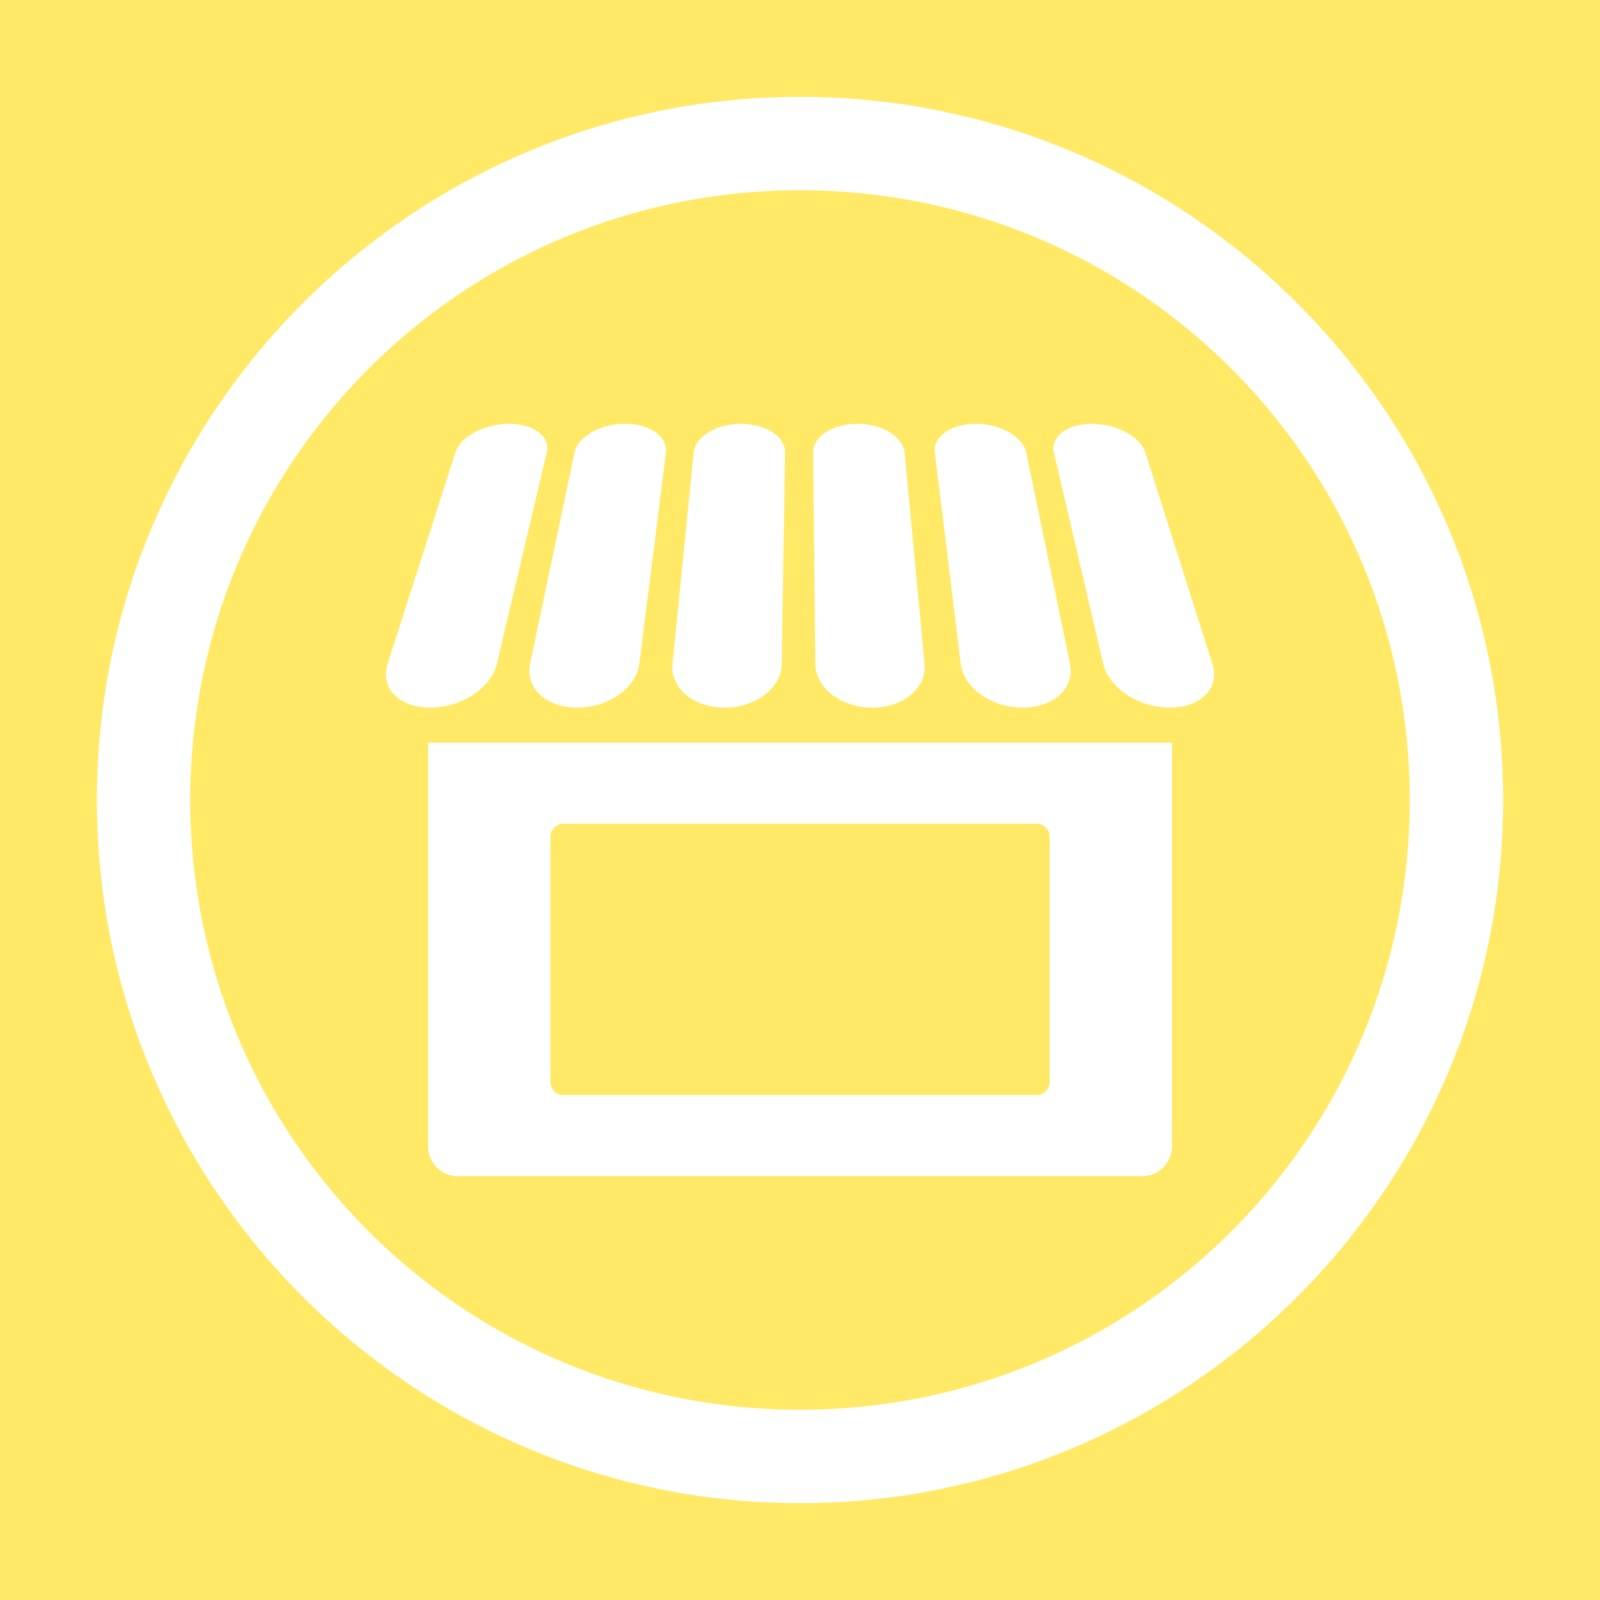 Shop vector icon. This flat rounded symbol uses white color and isolated on a yellow background.